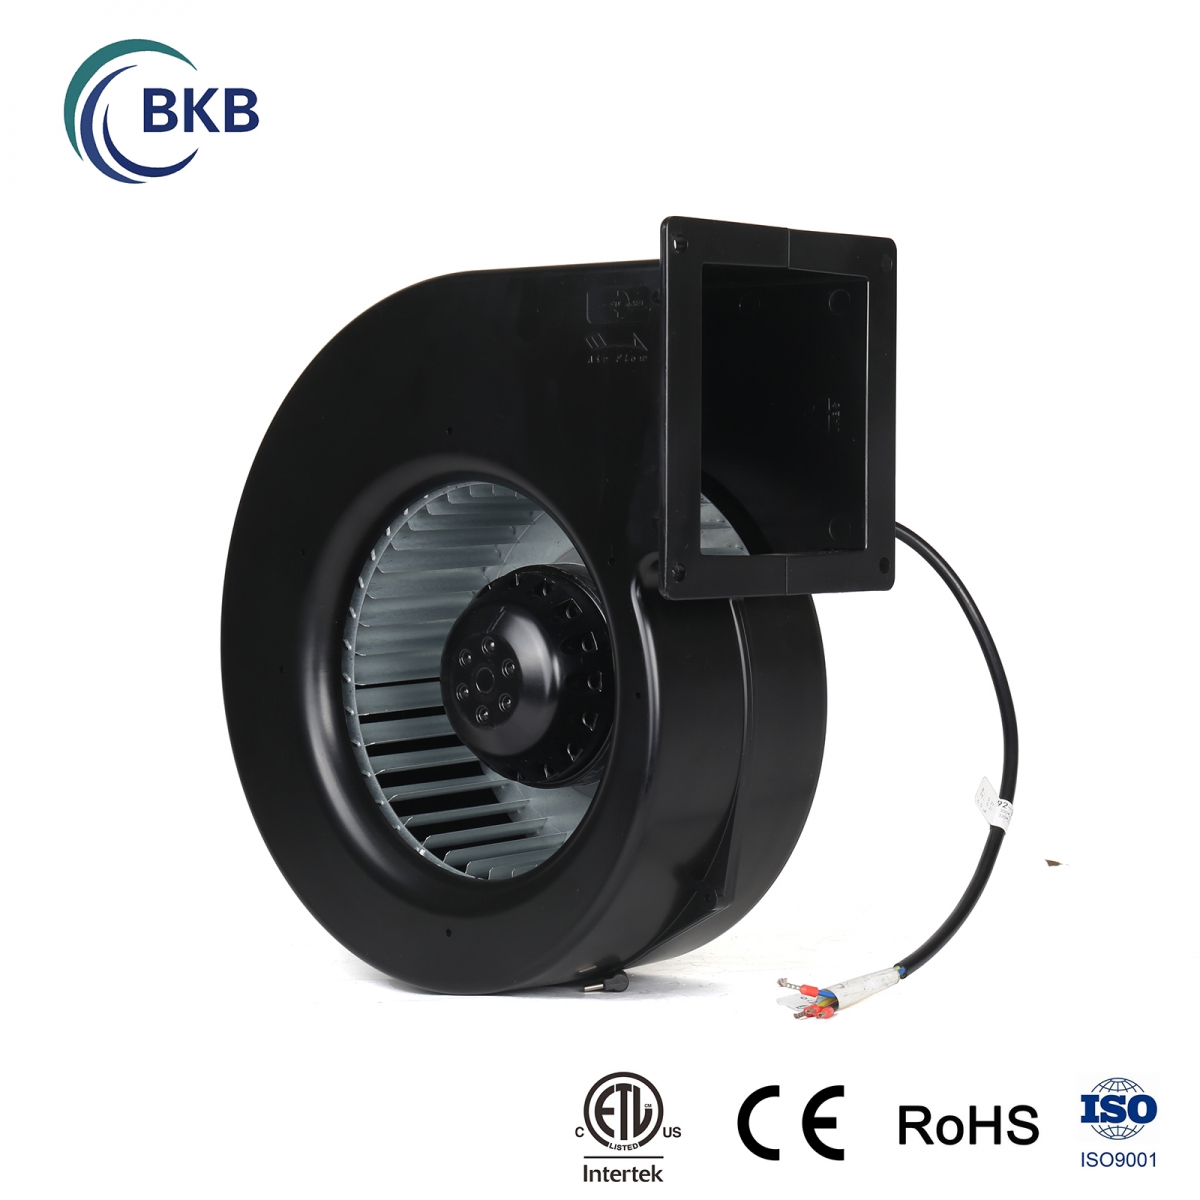 Motor- Outer rotor type single inlet sirocco fans-SUNLIGHT BLOWER,Centrifugal Fans, Inline Fans,Motors,Backward curved centrifugal fans ,Forward curved centrifugal fans ,inlet fans, EC fans